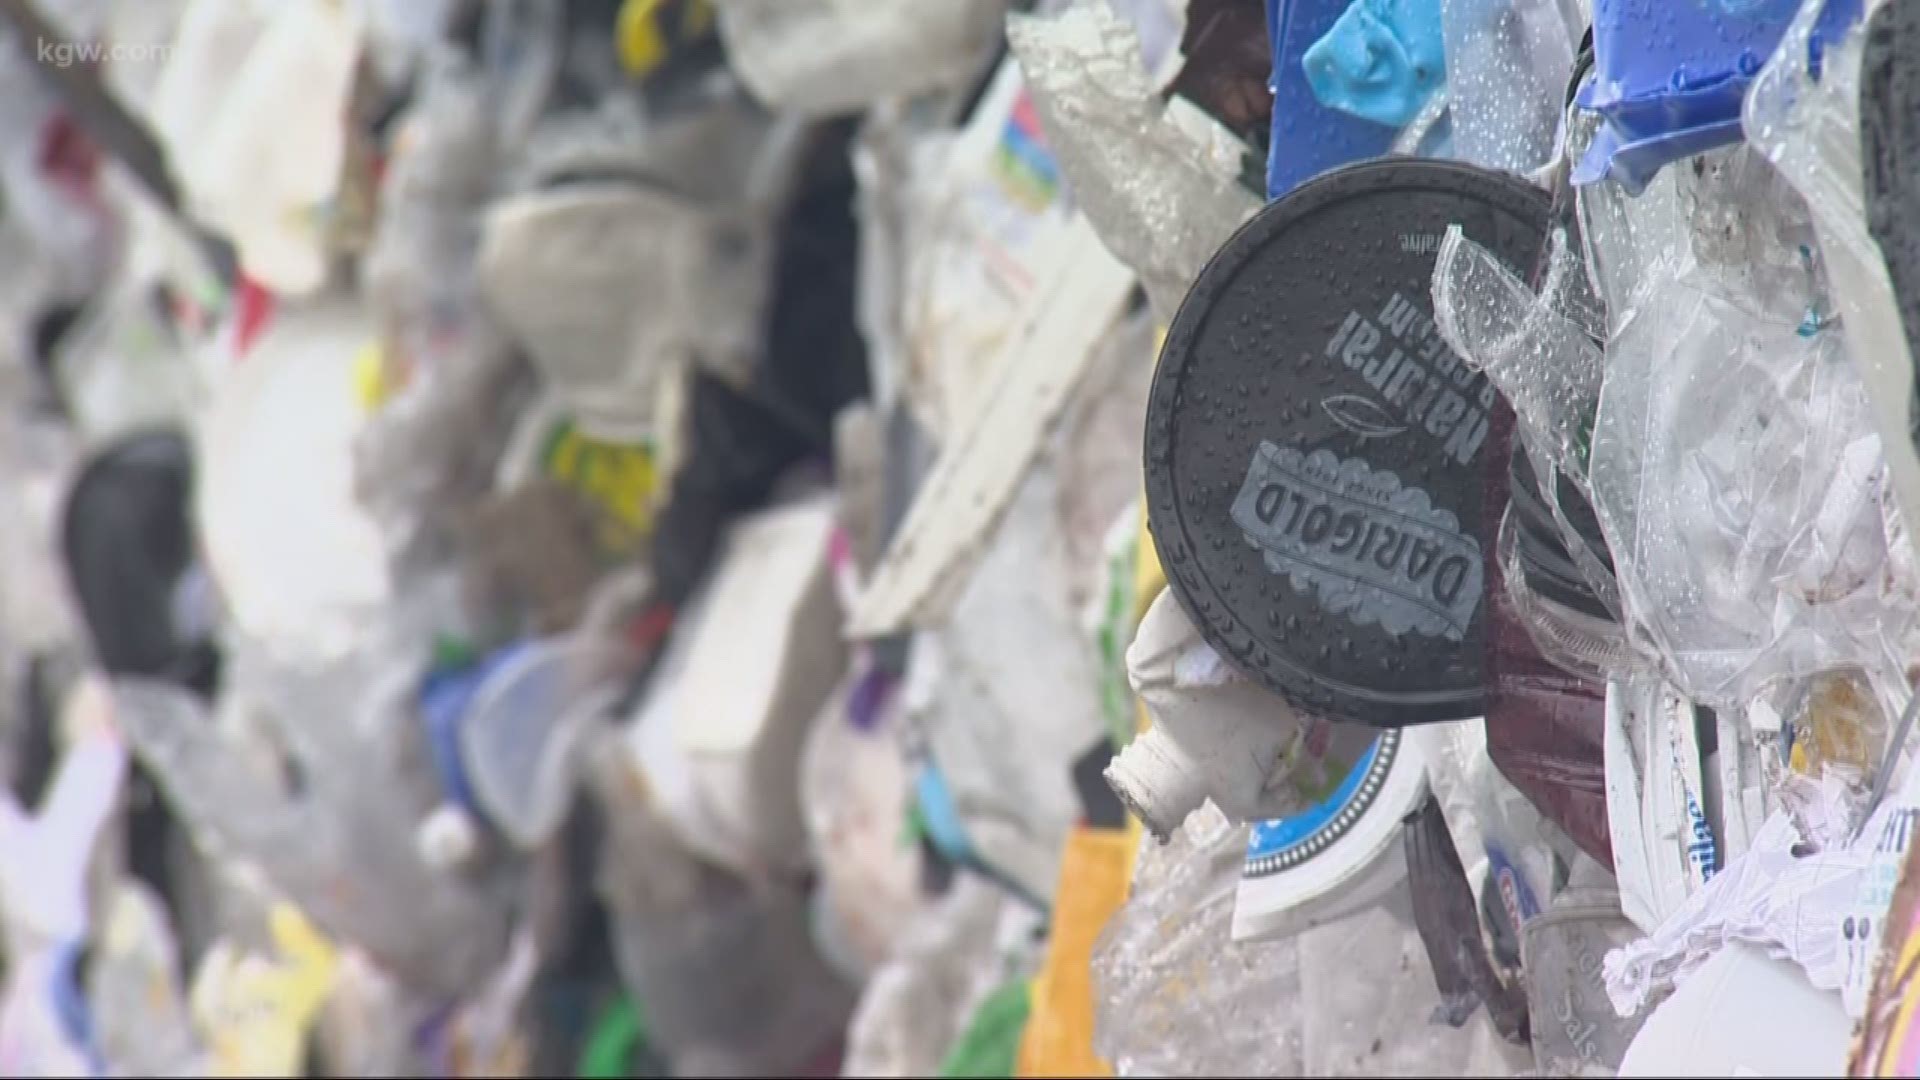 Marion County is resetting recycling.